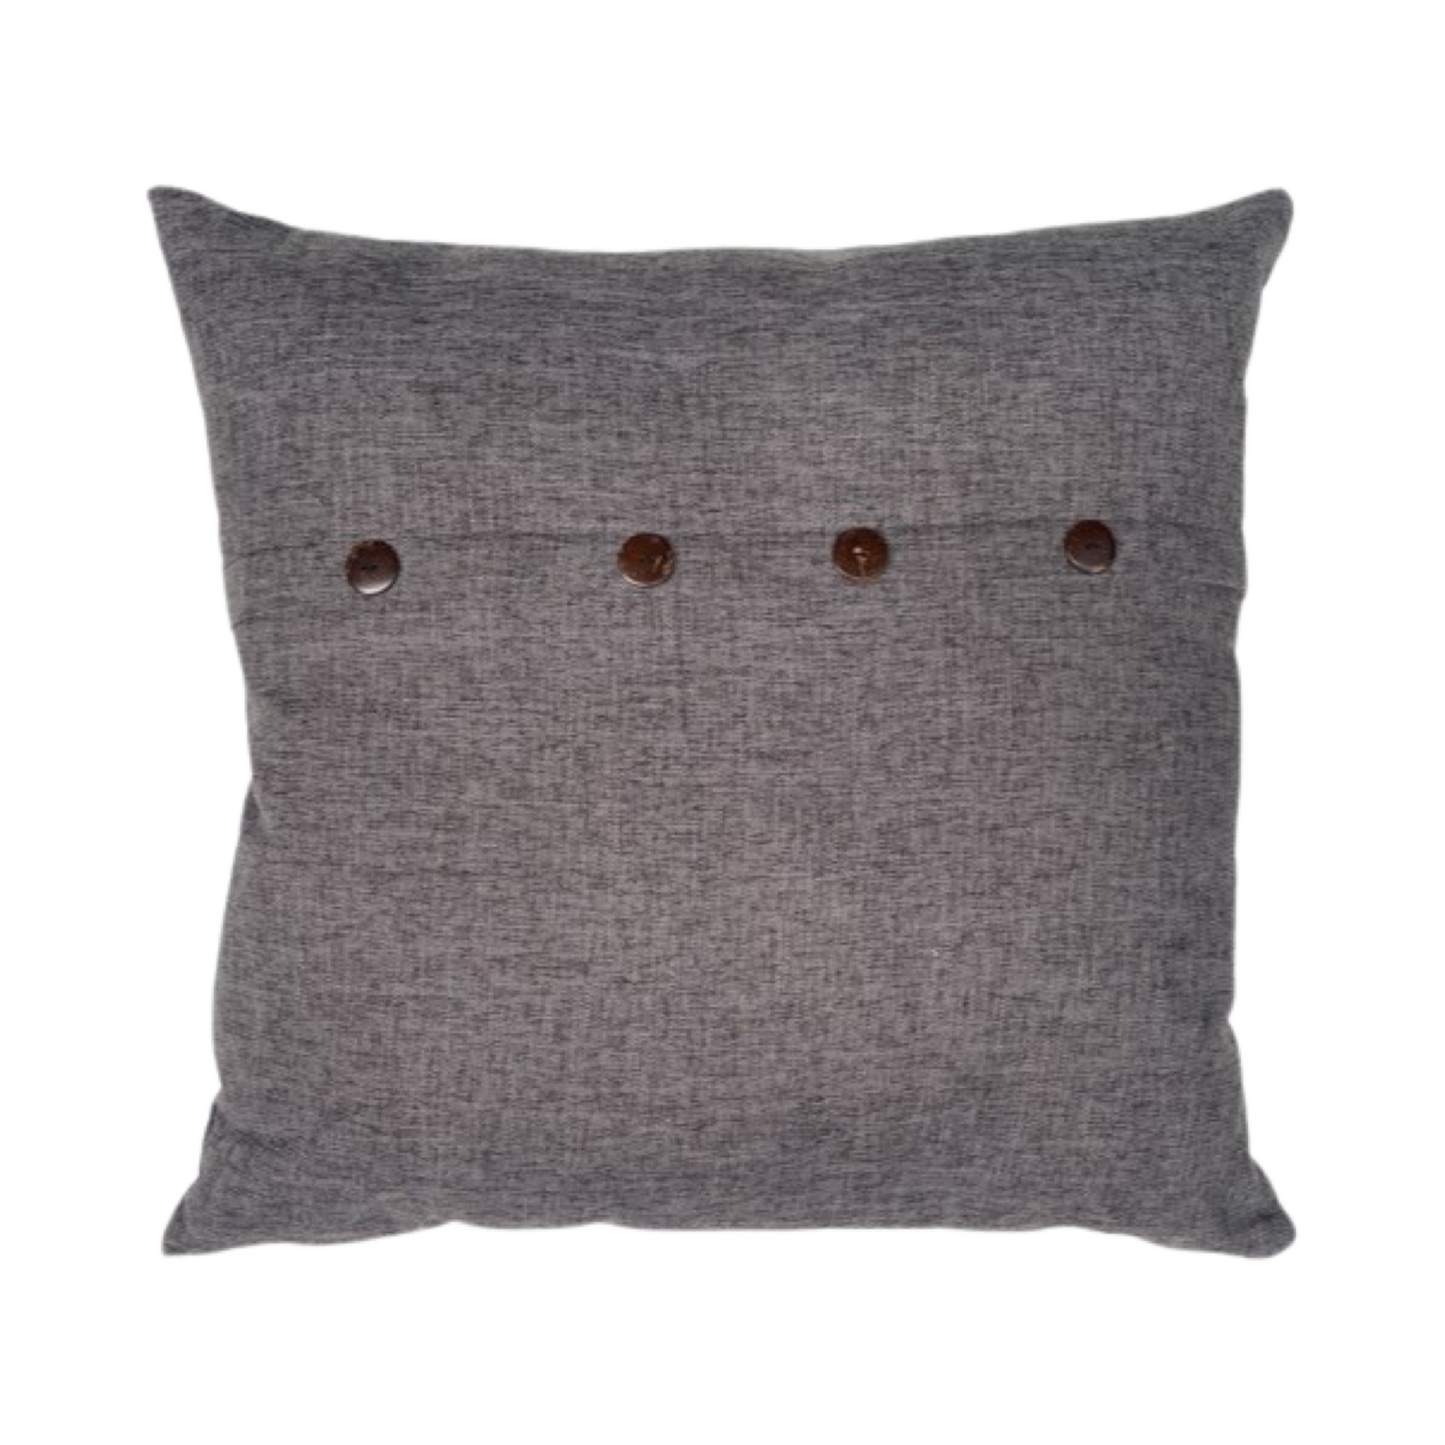 Charcoal Button Cushion Large